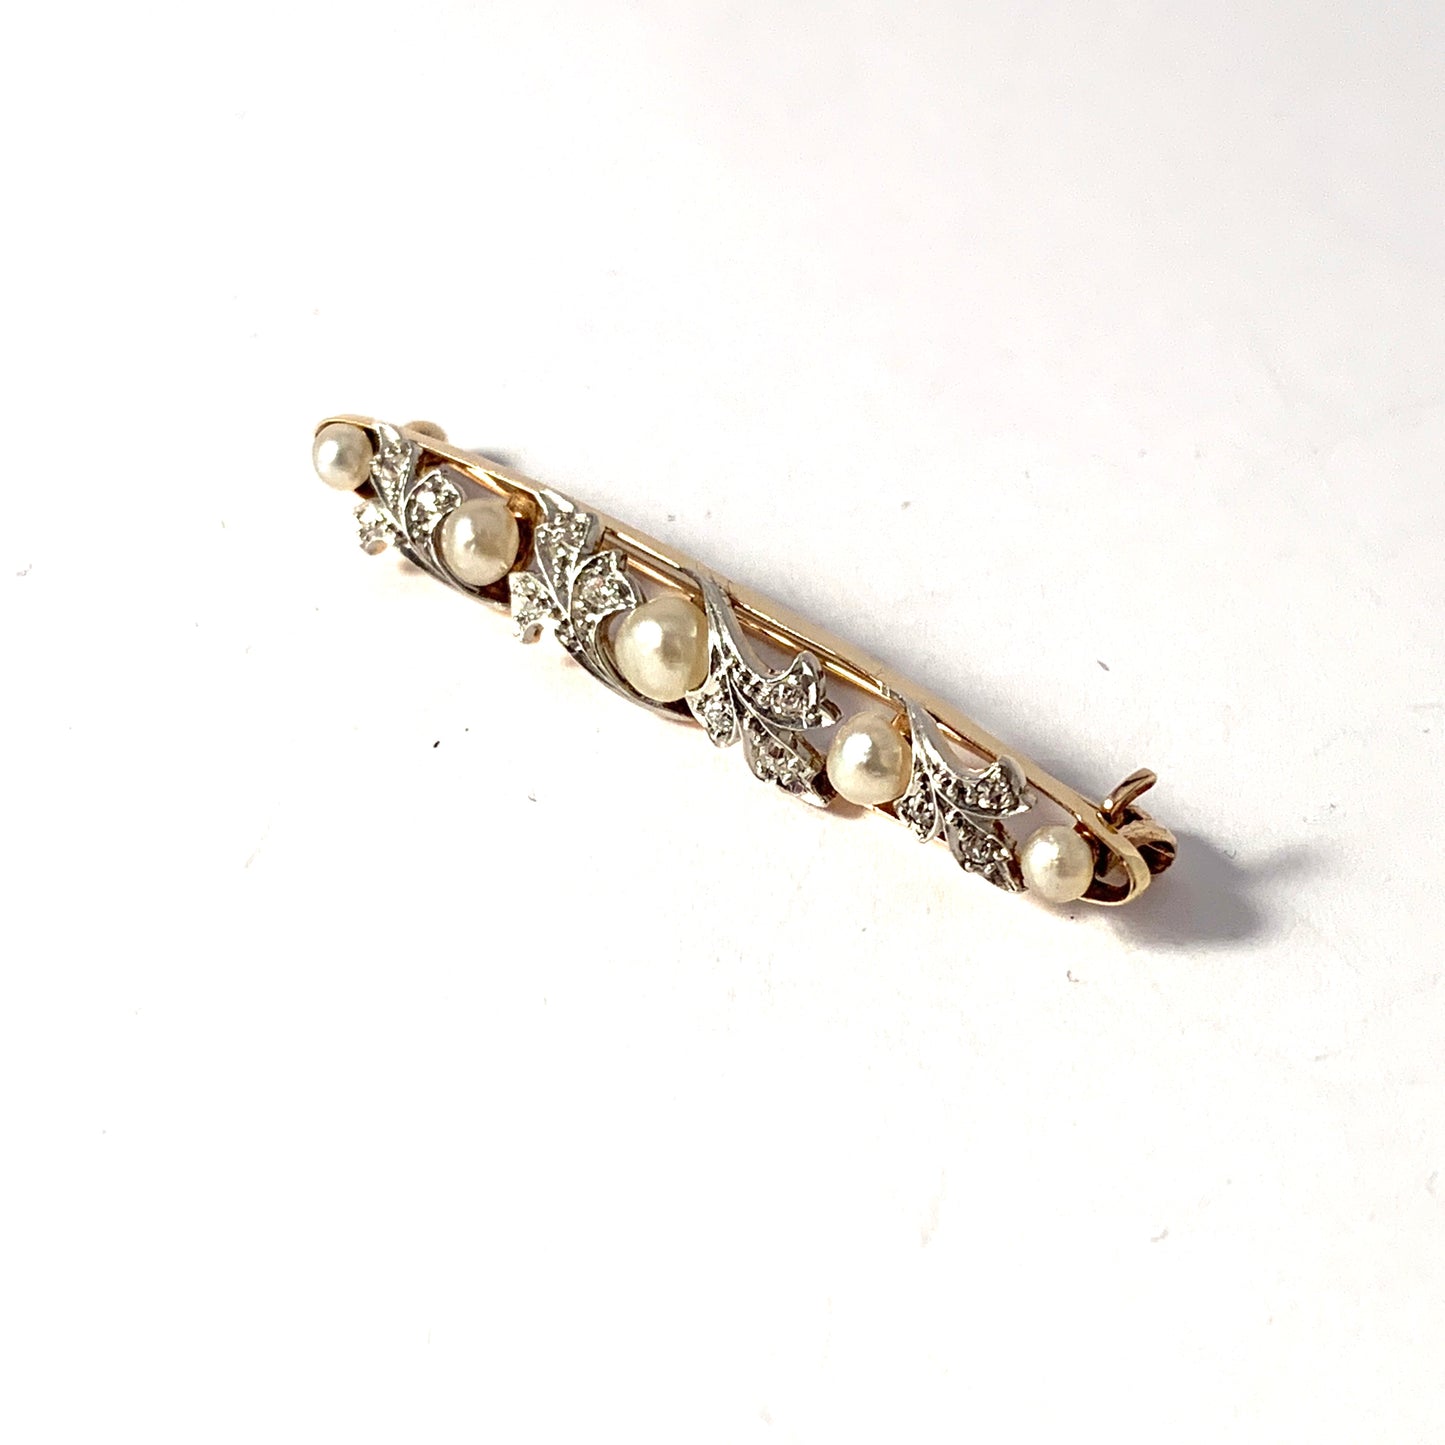 Early 1900s. Antique 10k Gold Diamond Pearl Pin Brooch.